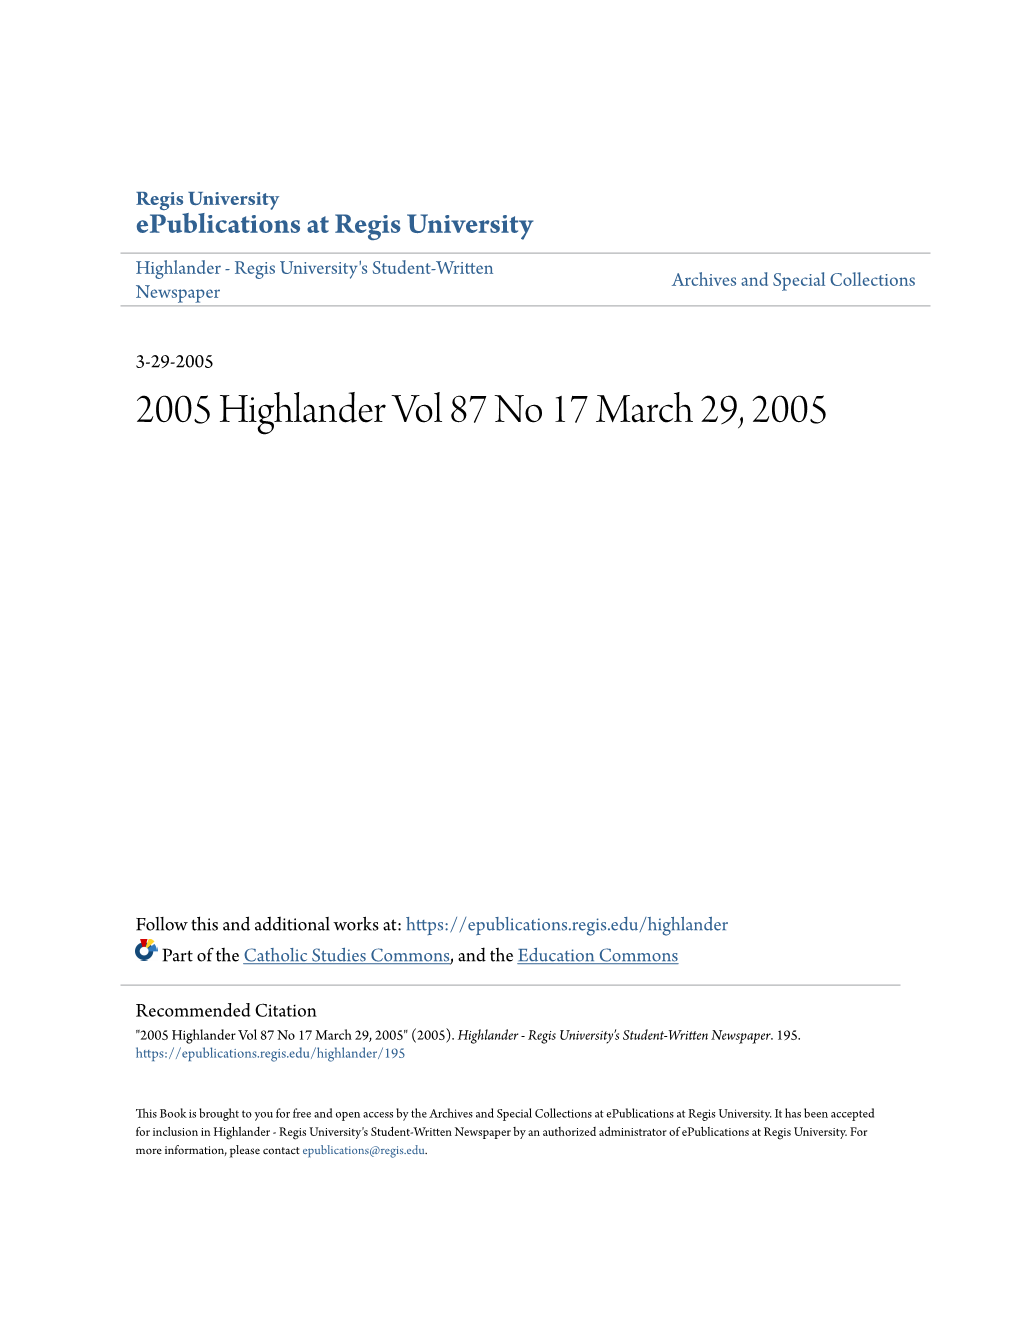 Highlander - Regis University's Student-Written Archives and Special Collections Newspaper